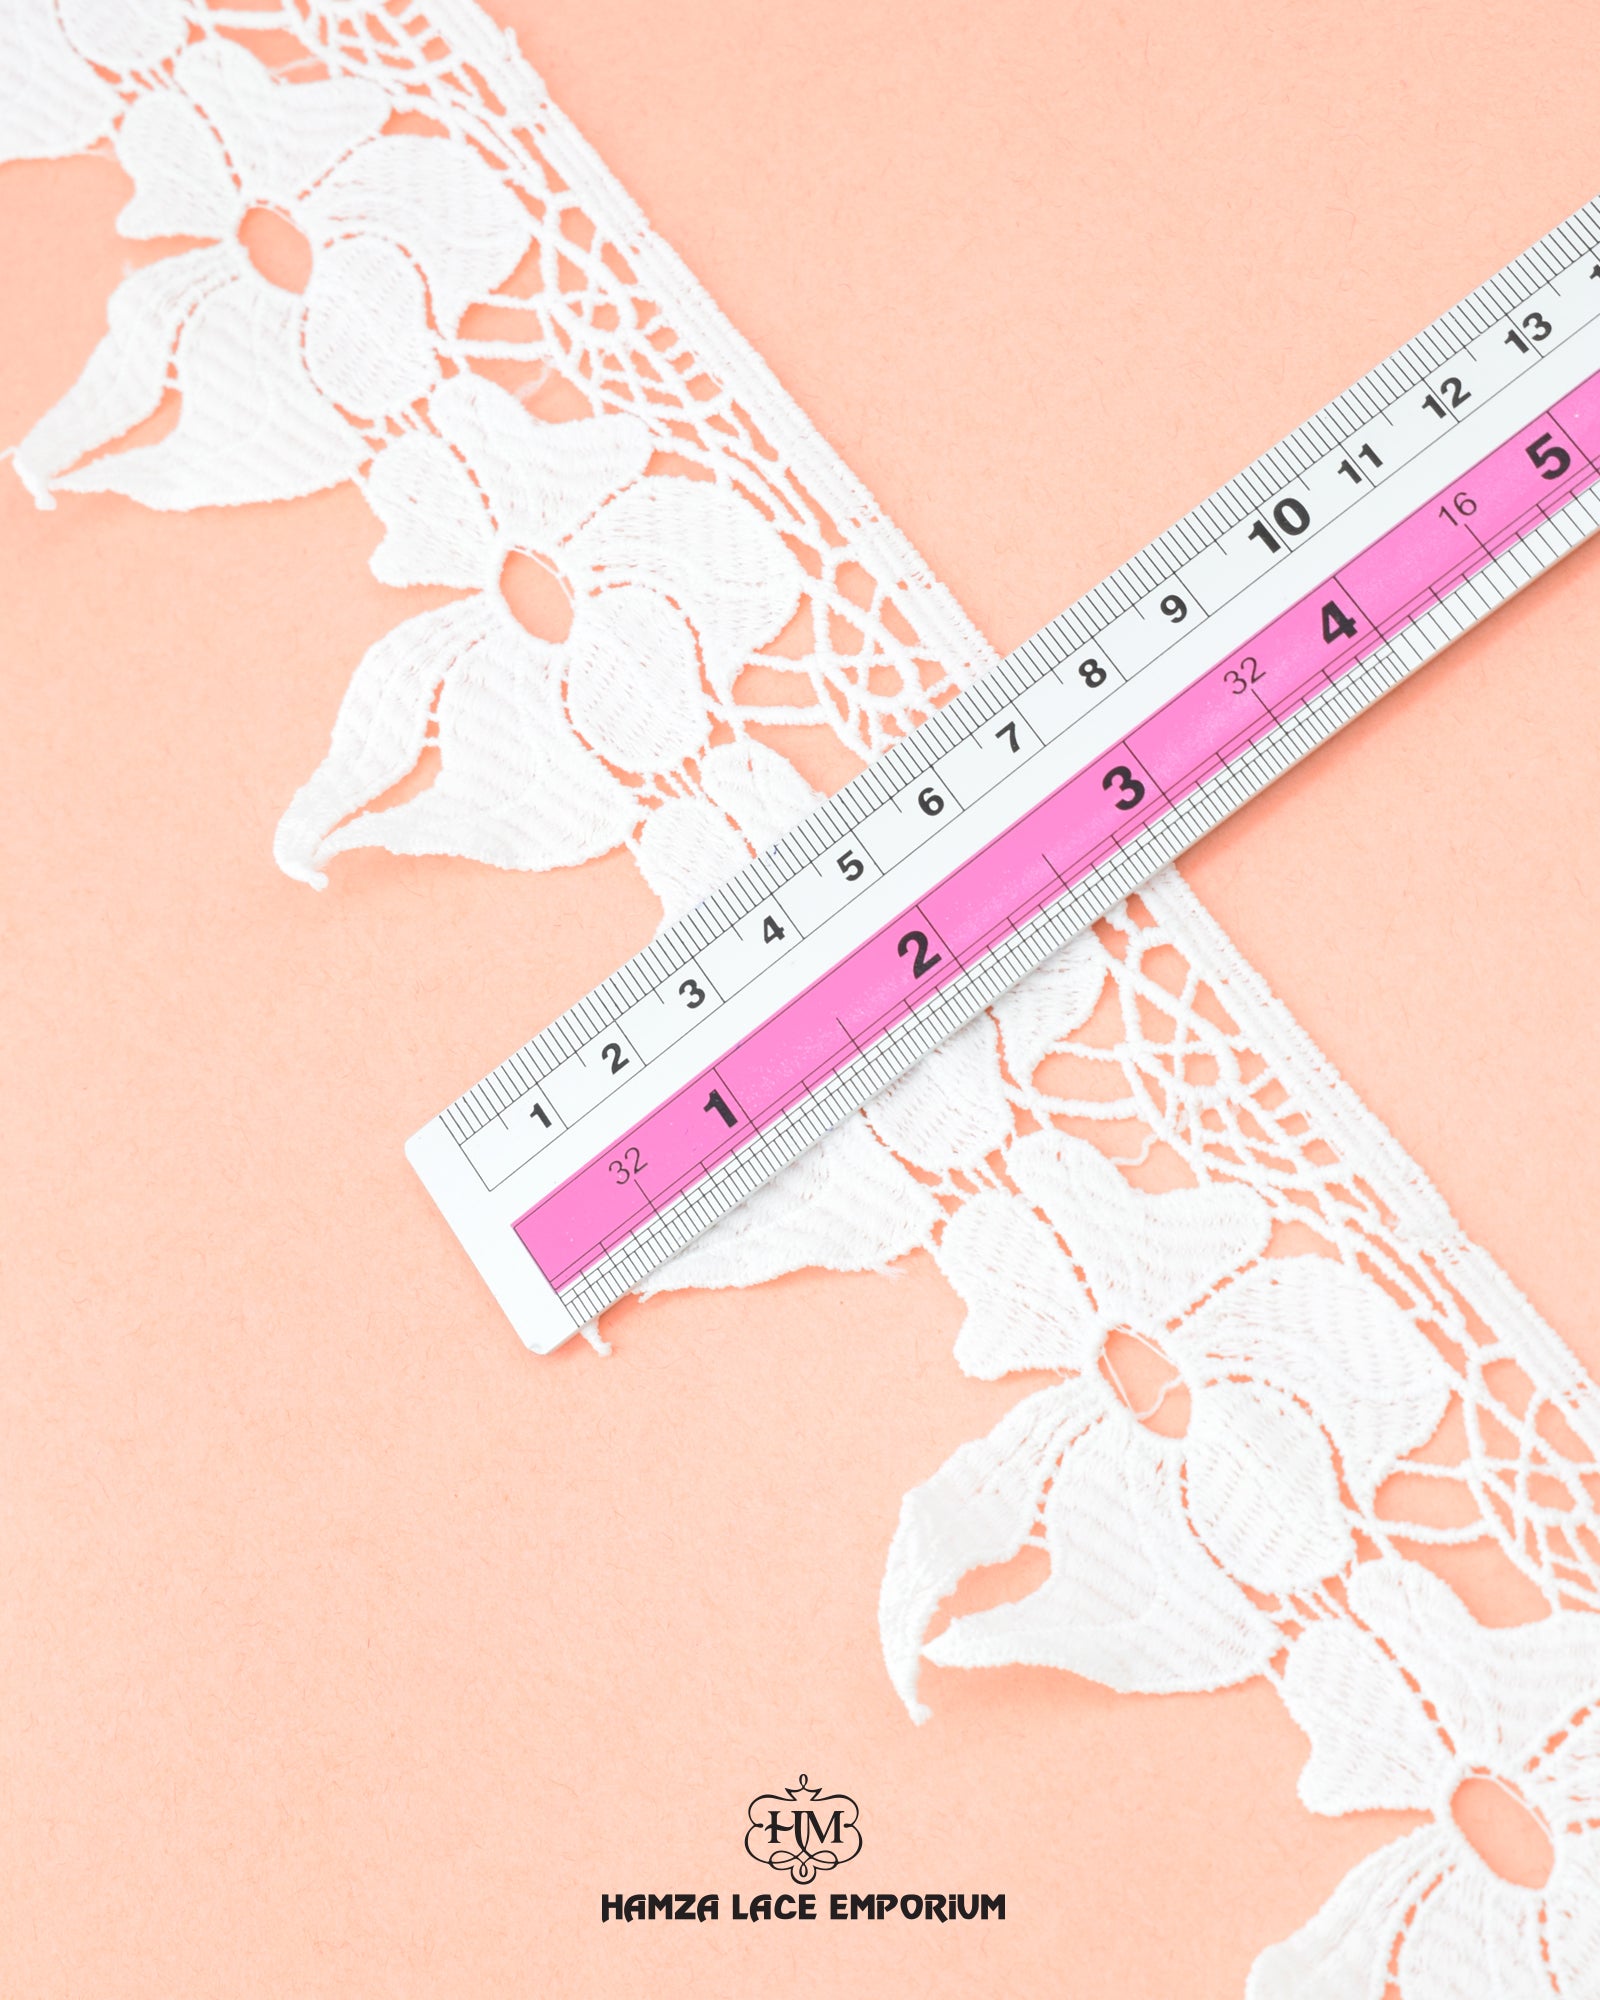 Size of the 'Edging Flower Lace 3543' is given as 3 inches with the help of a ruler